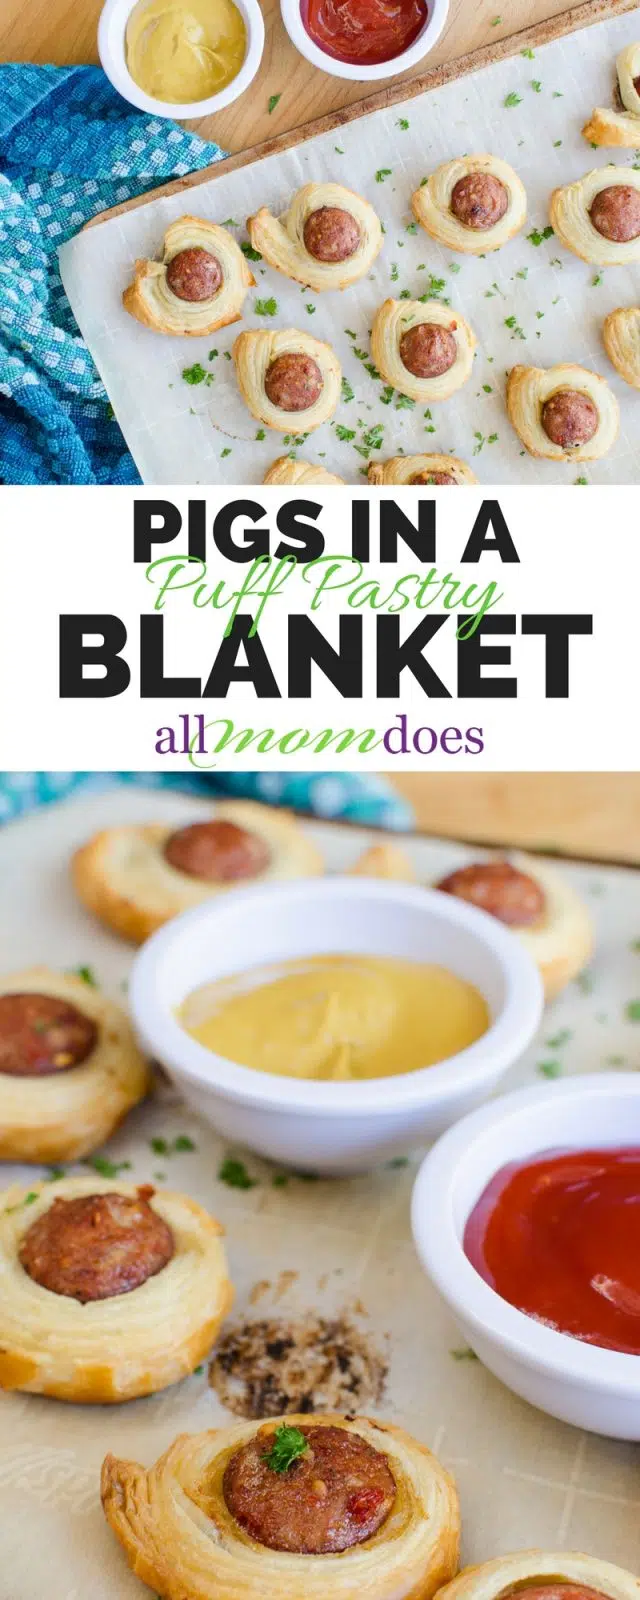 Pigs in a Blanket with Puff Pastry #appetizer